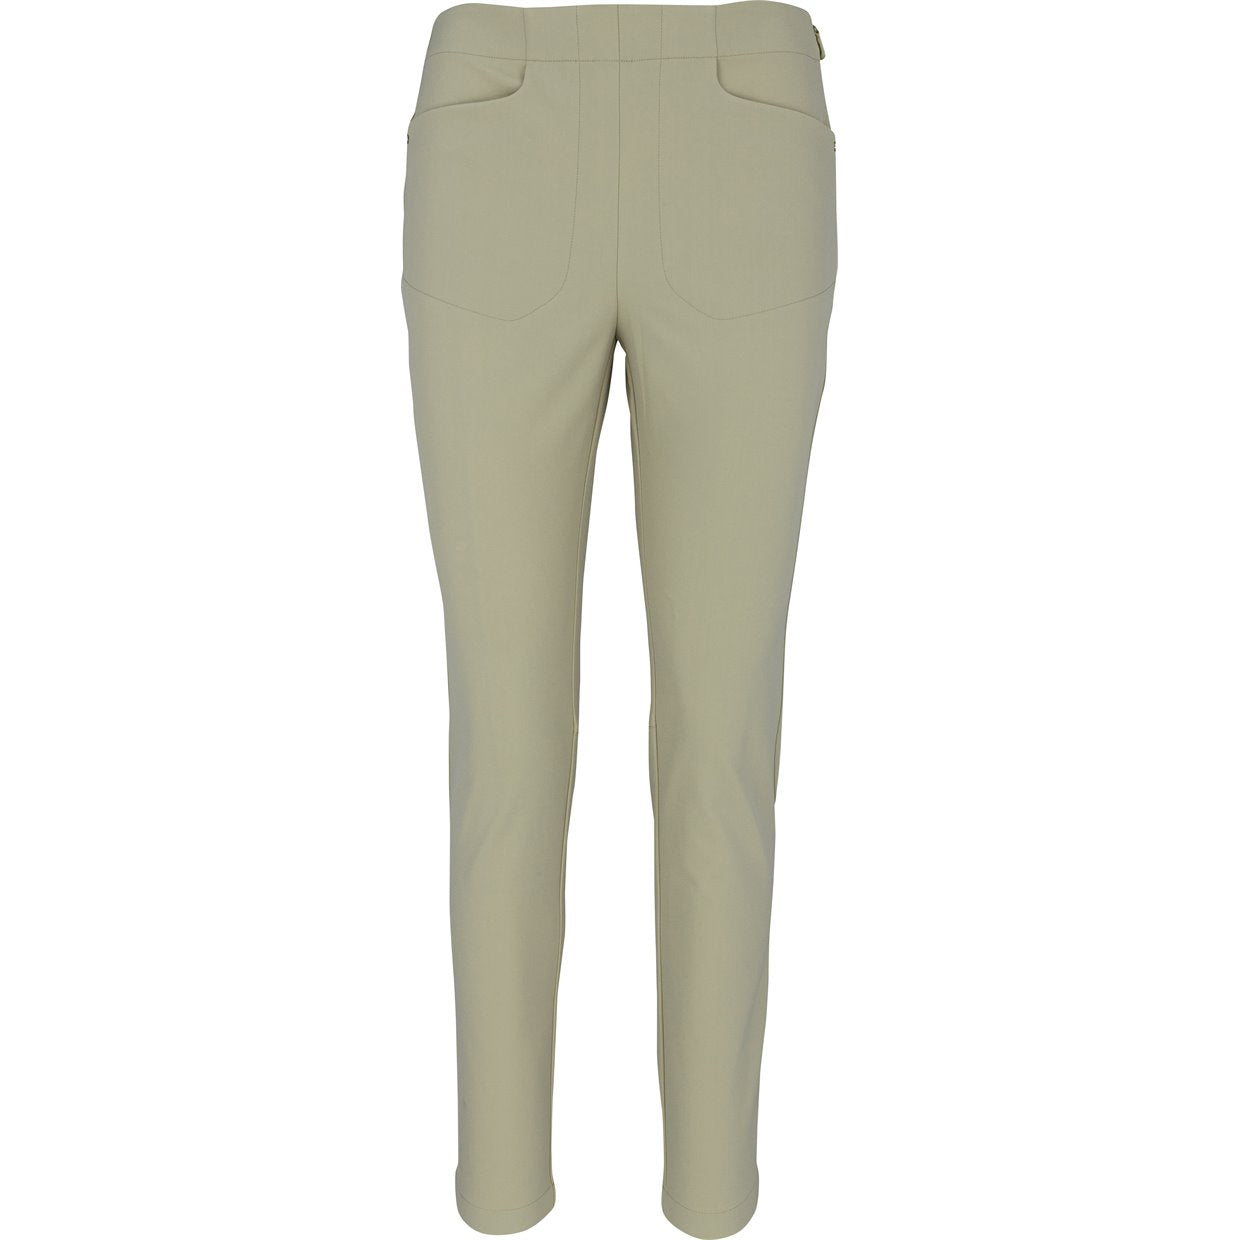 Bottoms Up: 4 Stylish and Functional Golf Pants for Women - GolfThreads